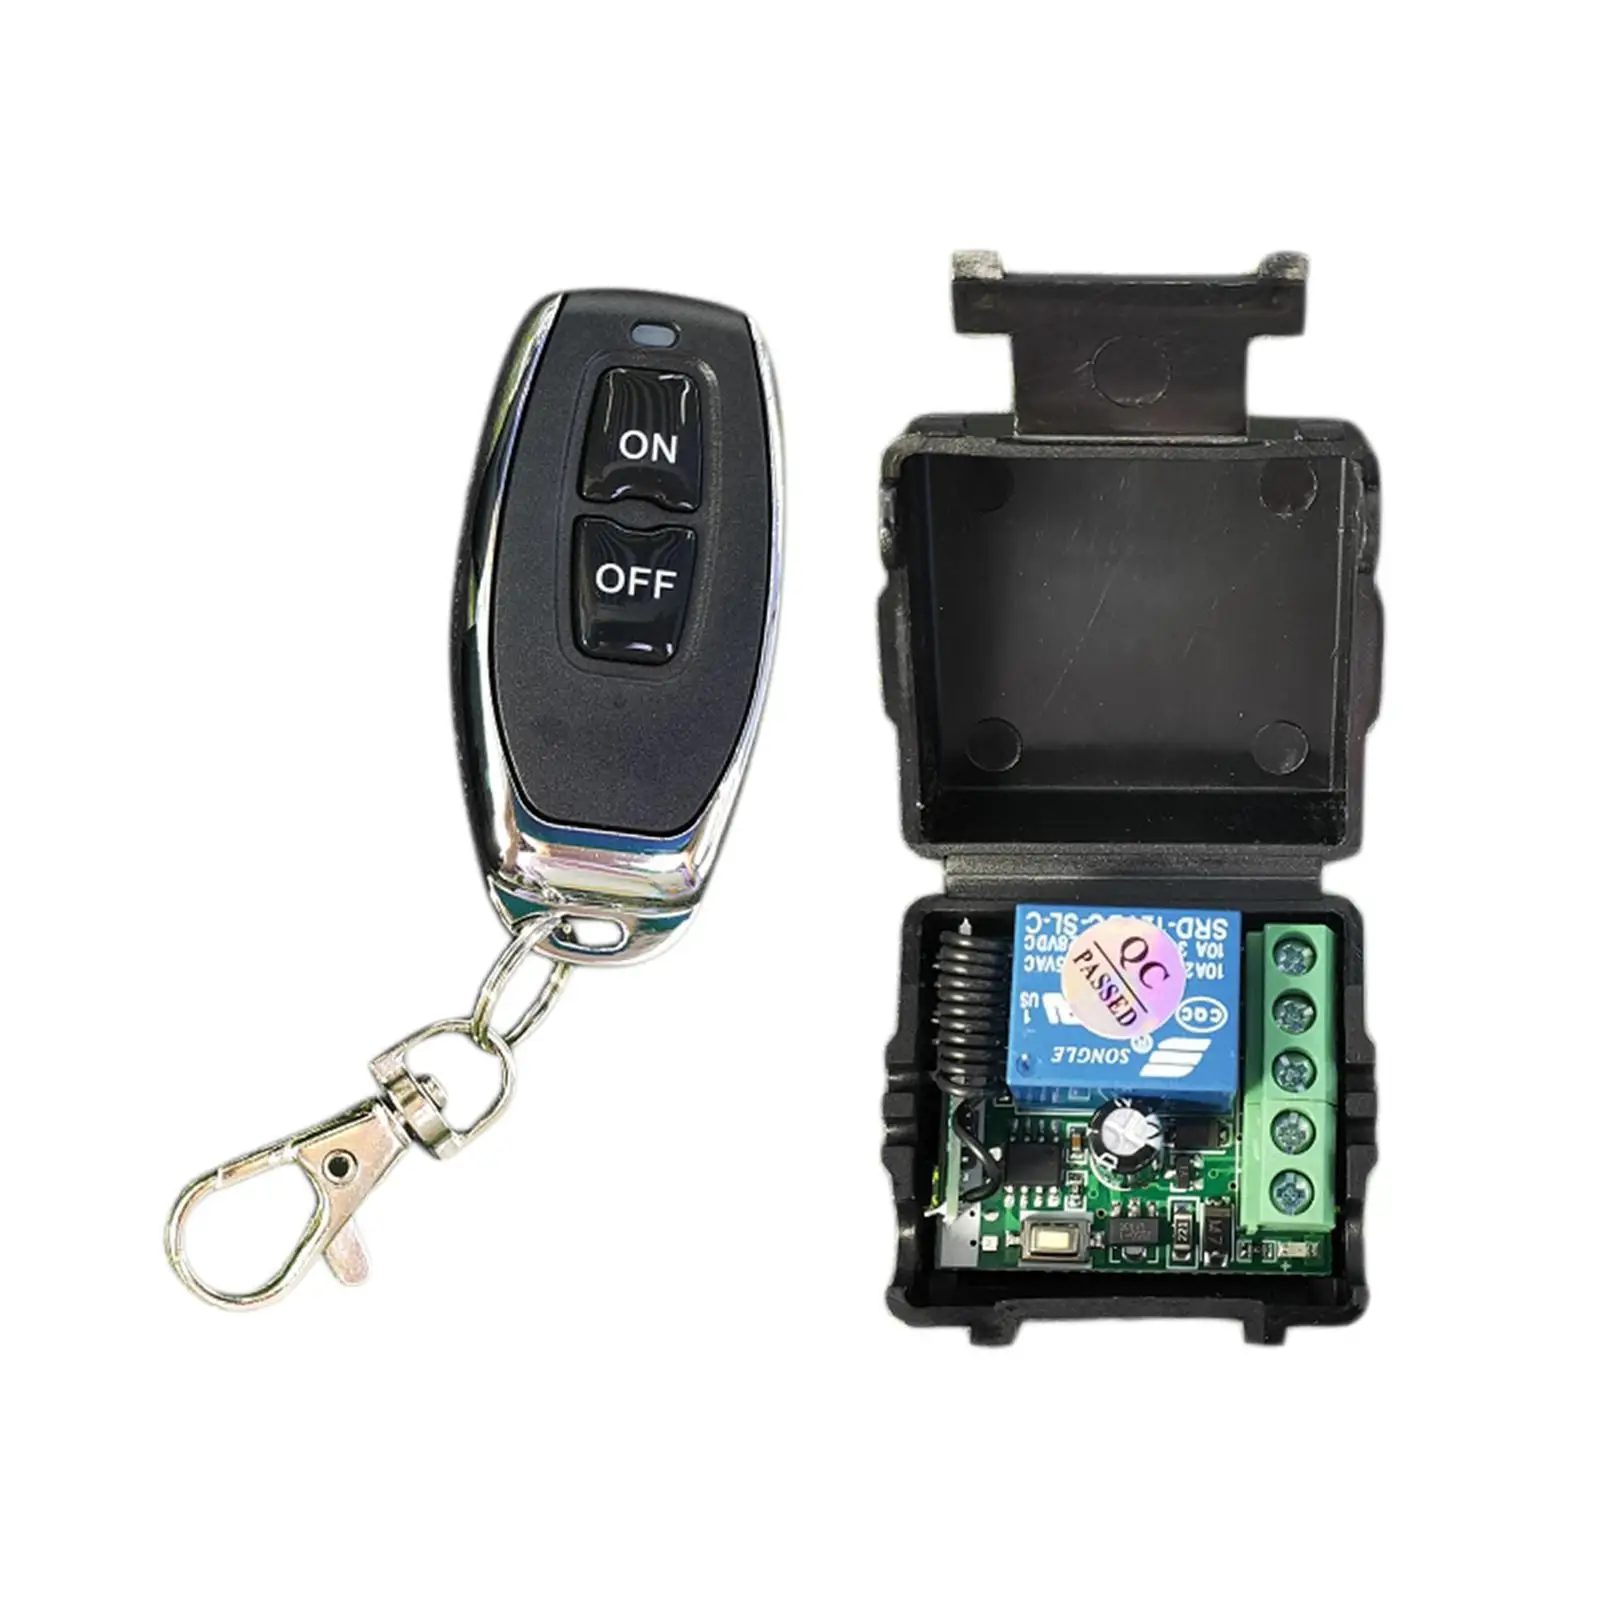 Auto Wireless Remotes Control Switch for Truck RV Repair Part